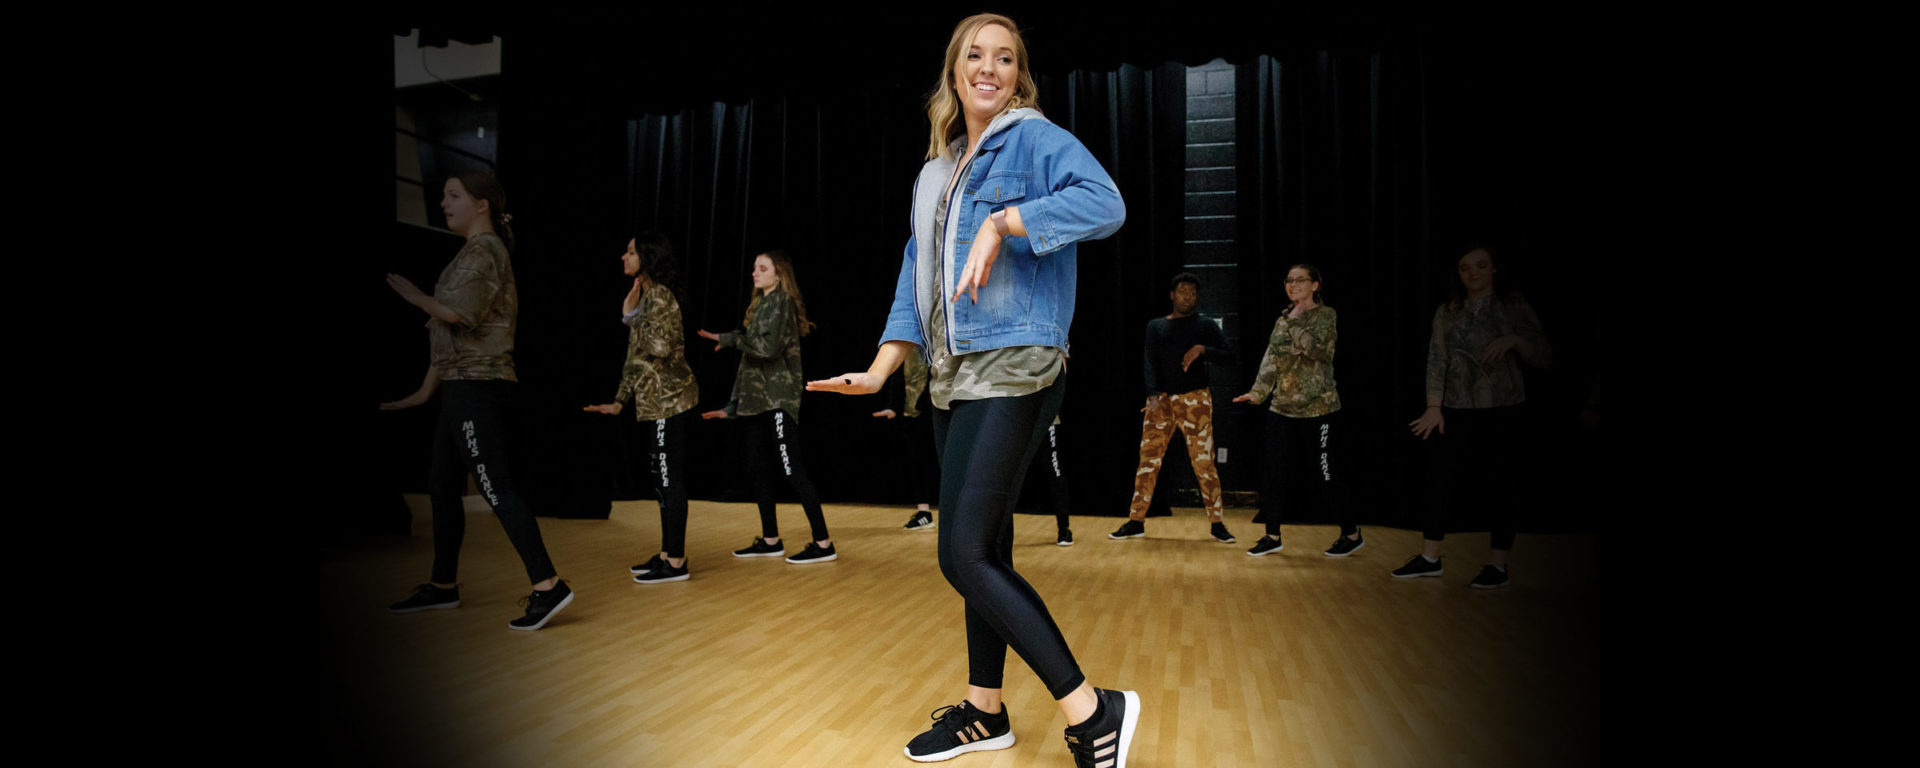 Abby Murphy points her left toe, instructing a row of dance students behind her